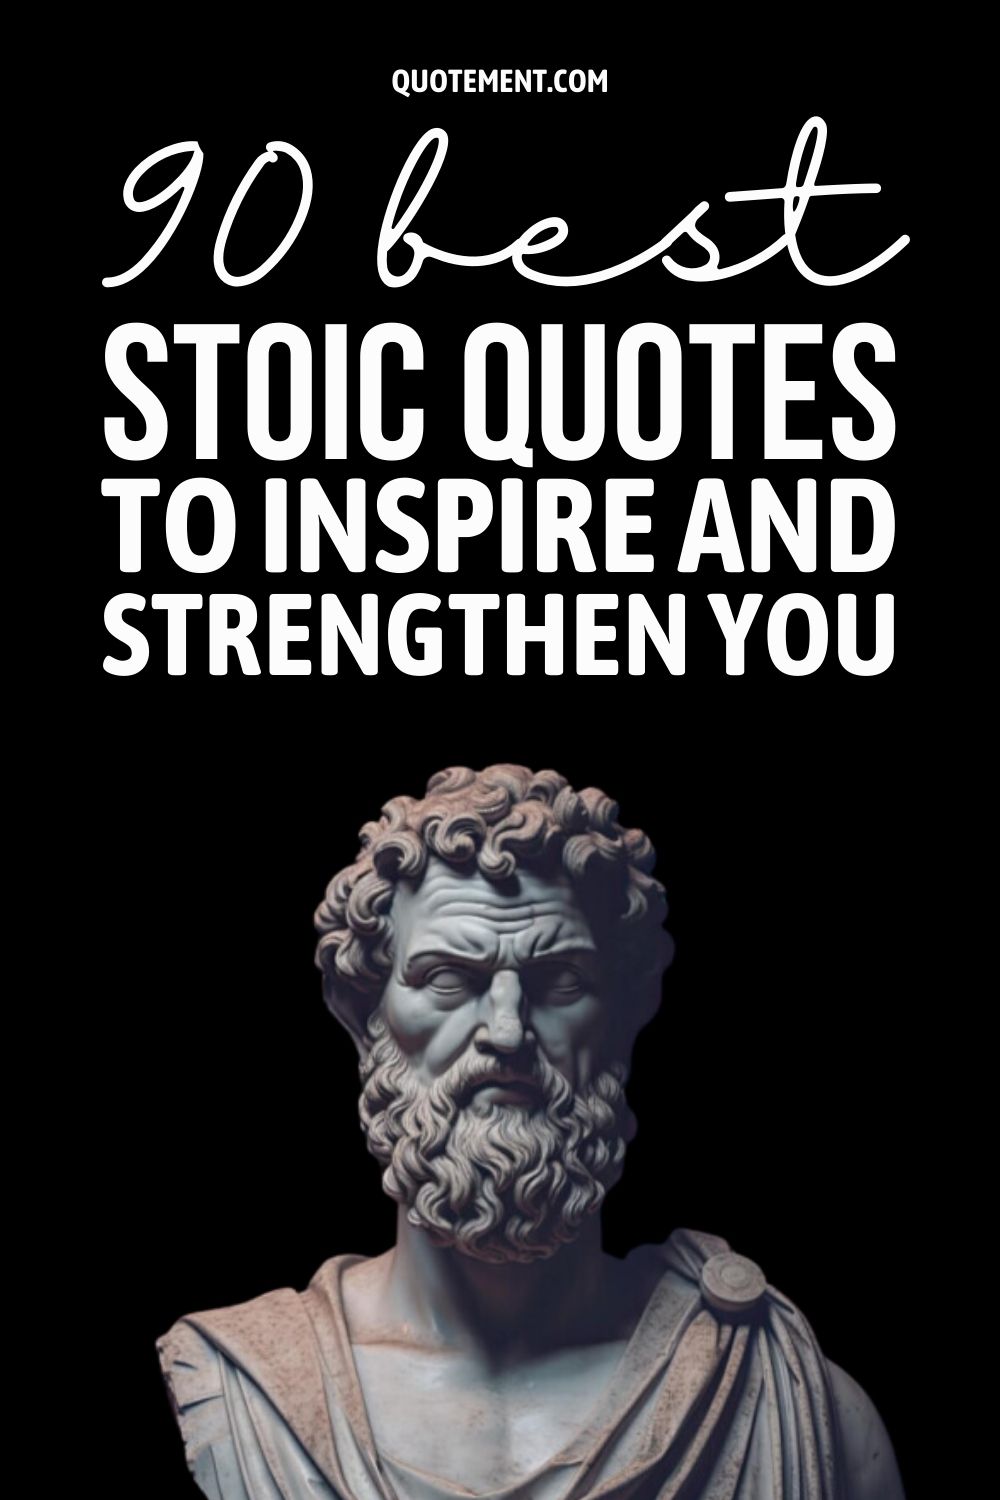 90 Best Stoic Quotes To Inspire And Strengthen You